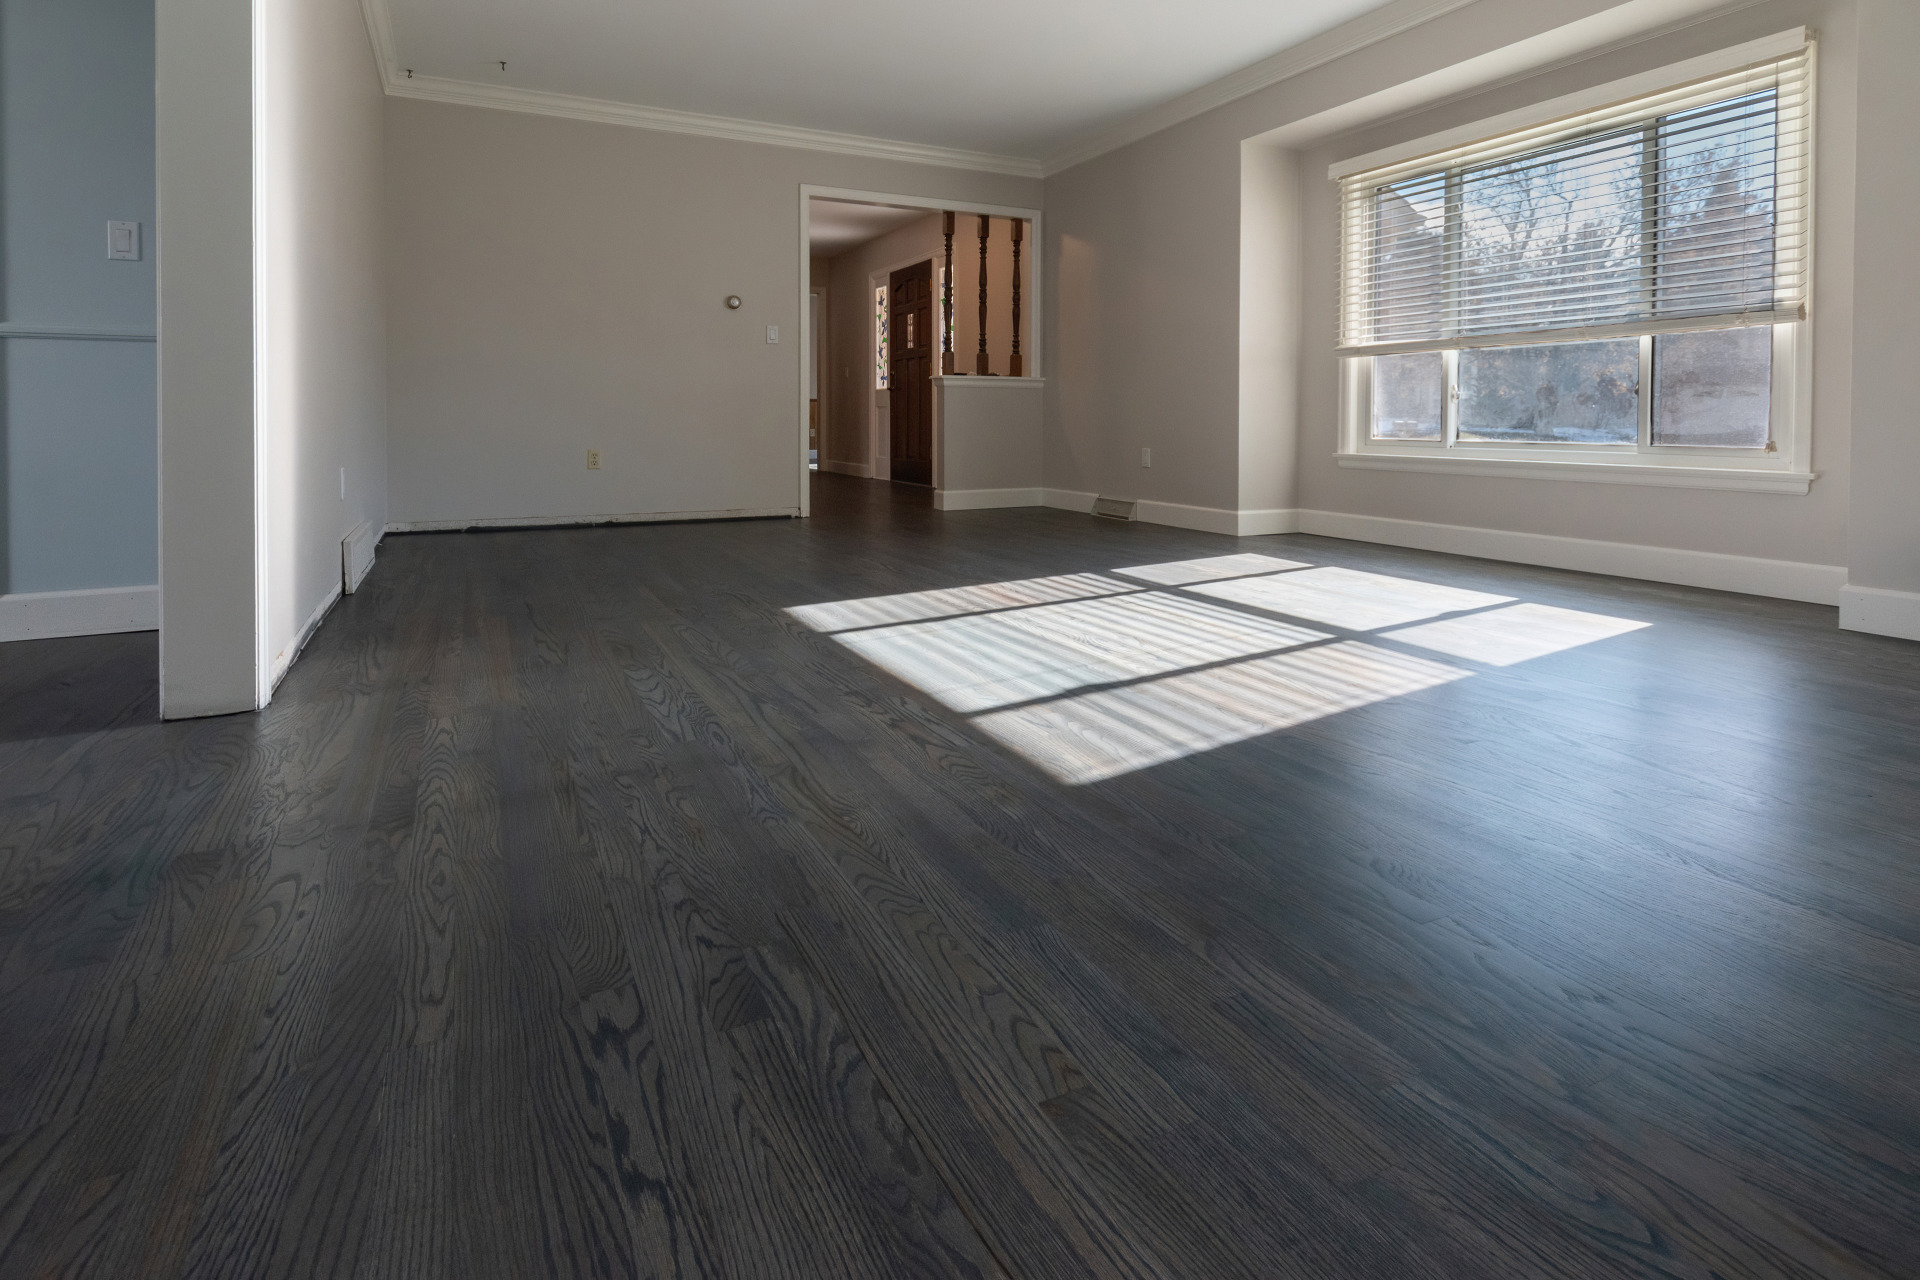 Driftwood Stain Or Red Oak The, Driftwood Stain Color Hardwood Floors